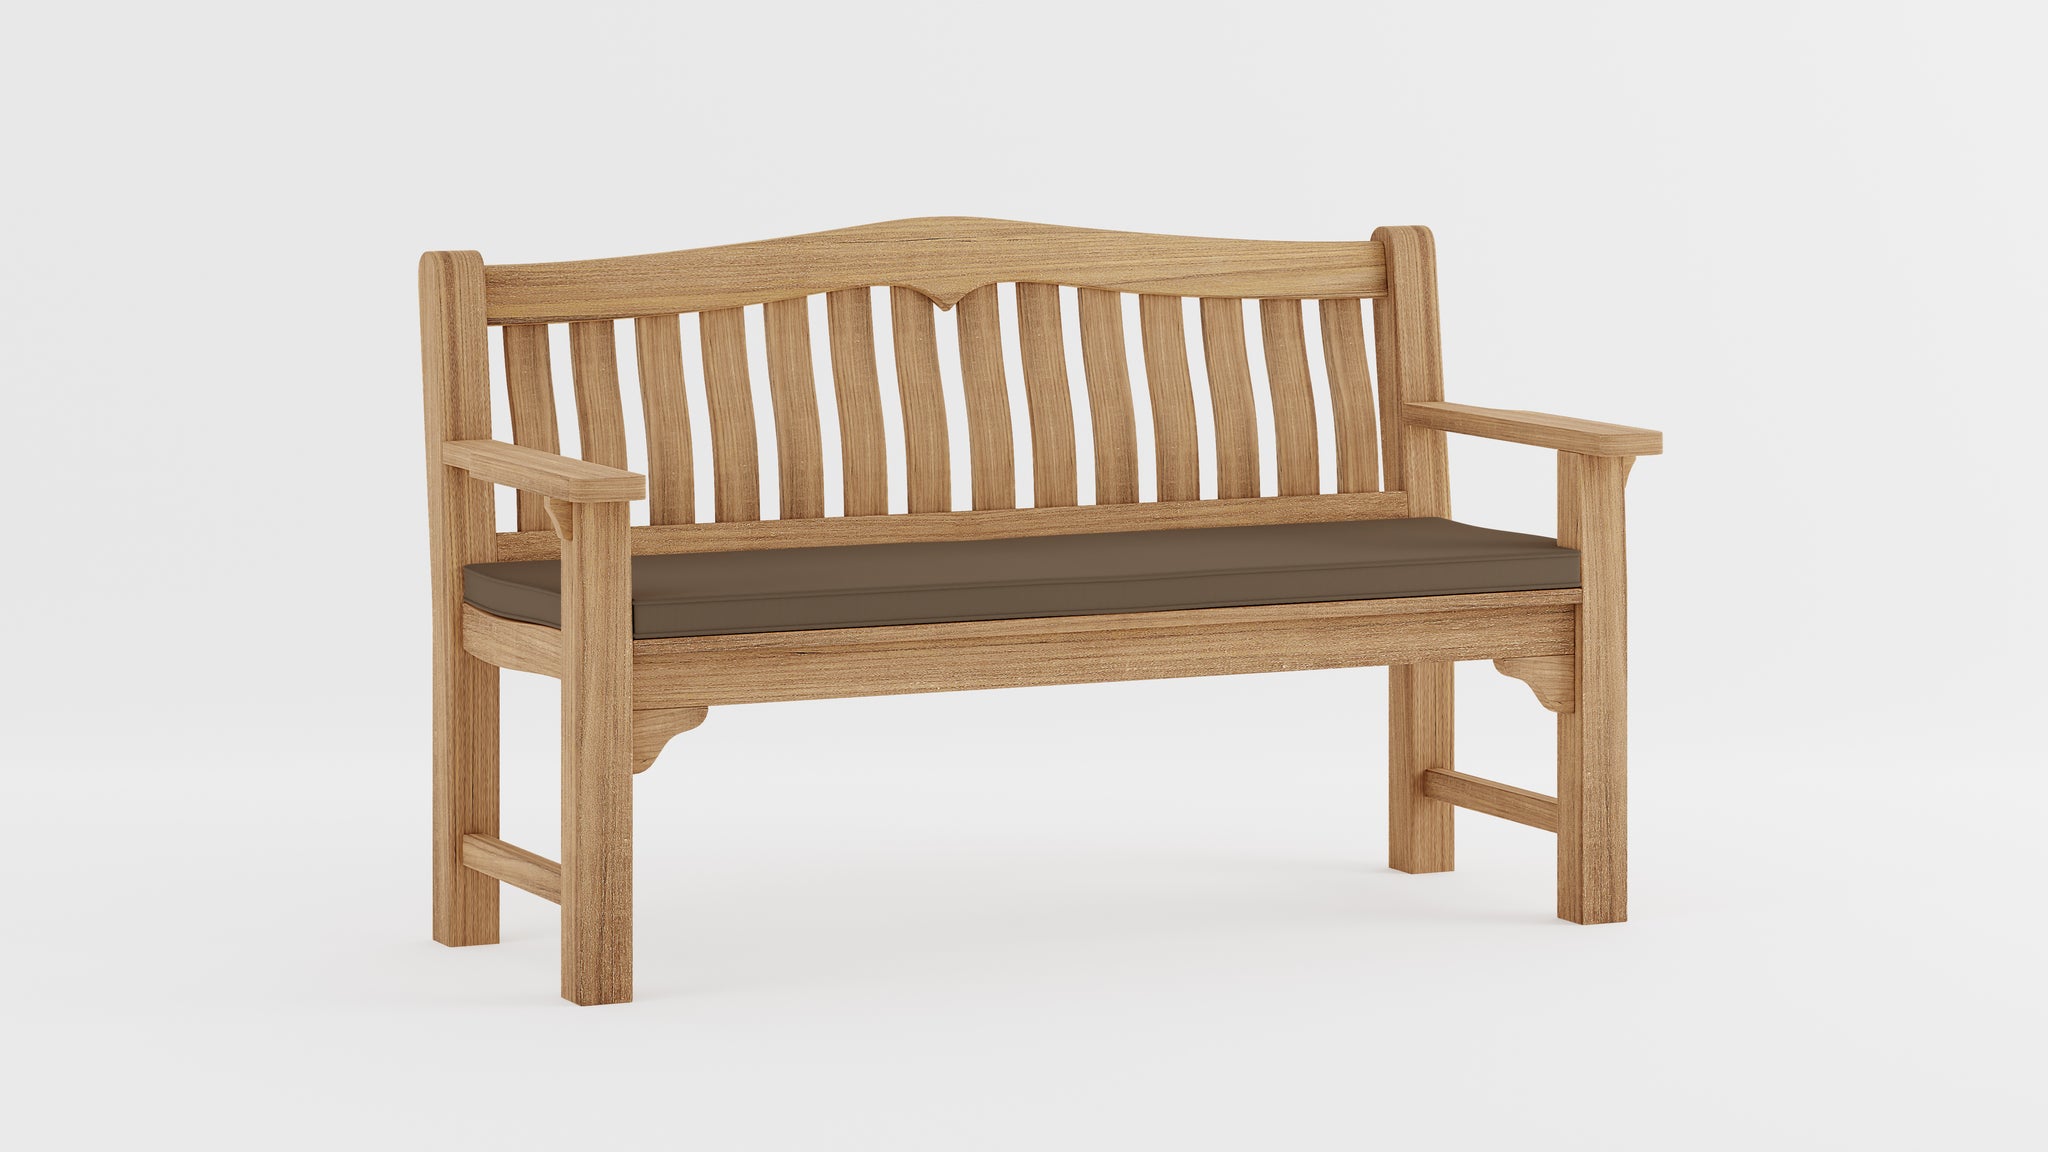 Hereford Teak Garden Bench with Taupe Cushion